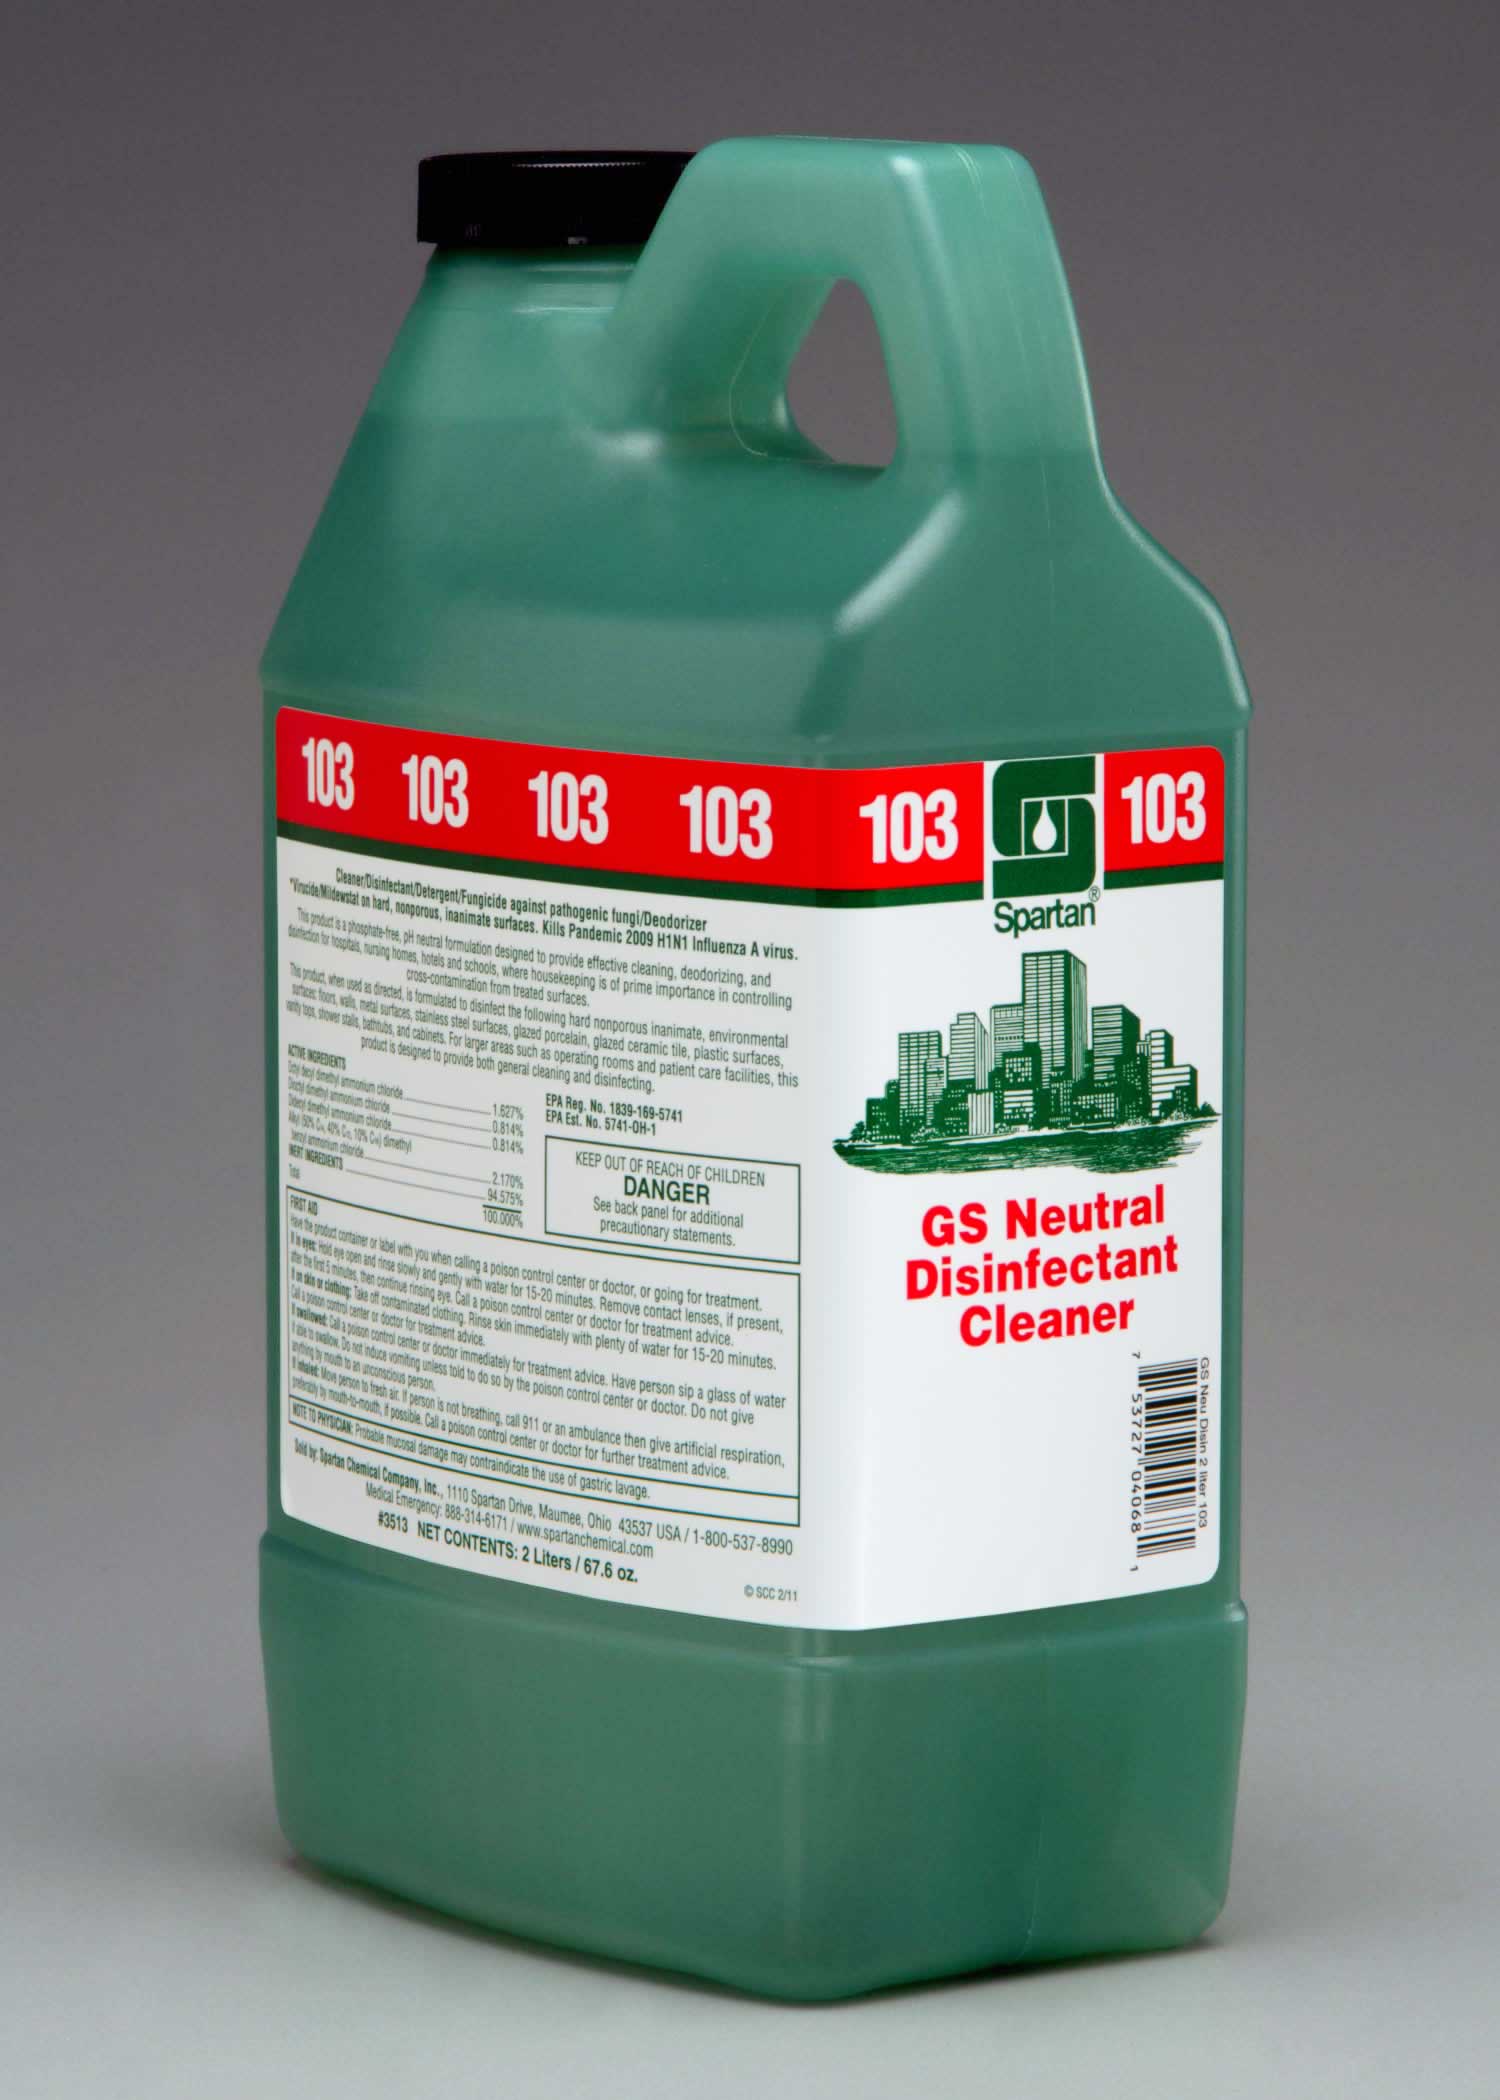 GS Neutral disinfectant quaternary disinfectant cleaner